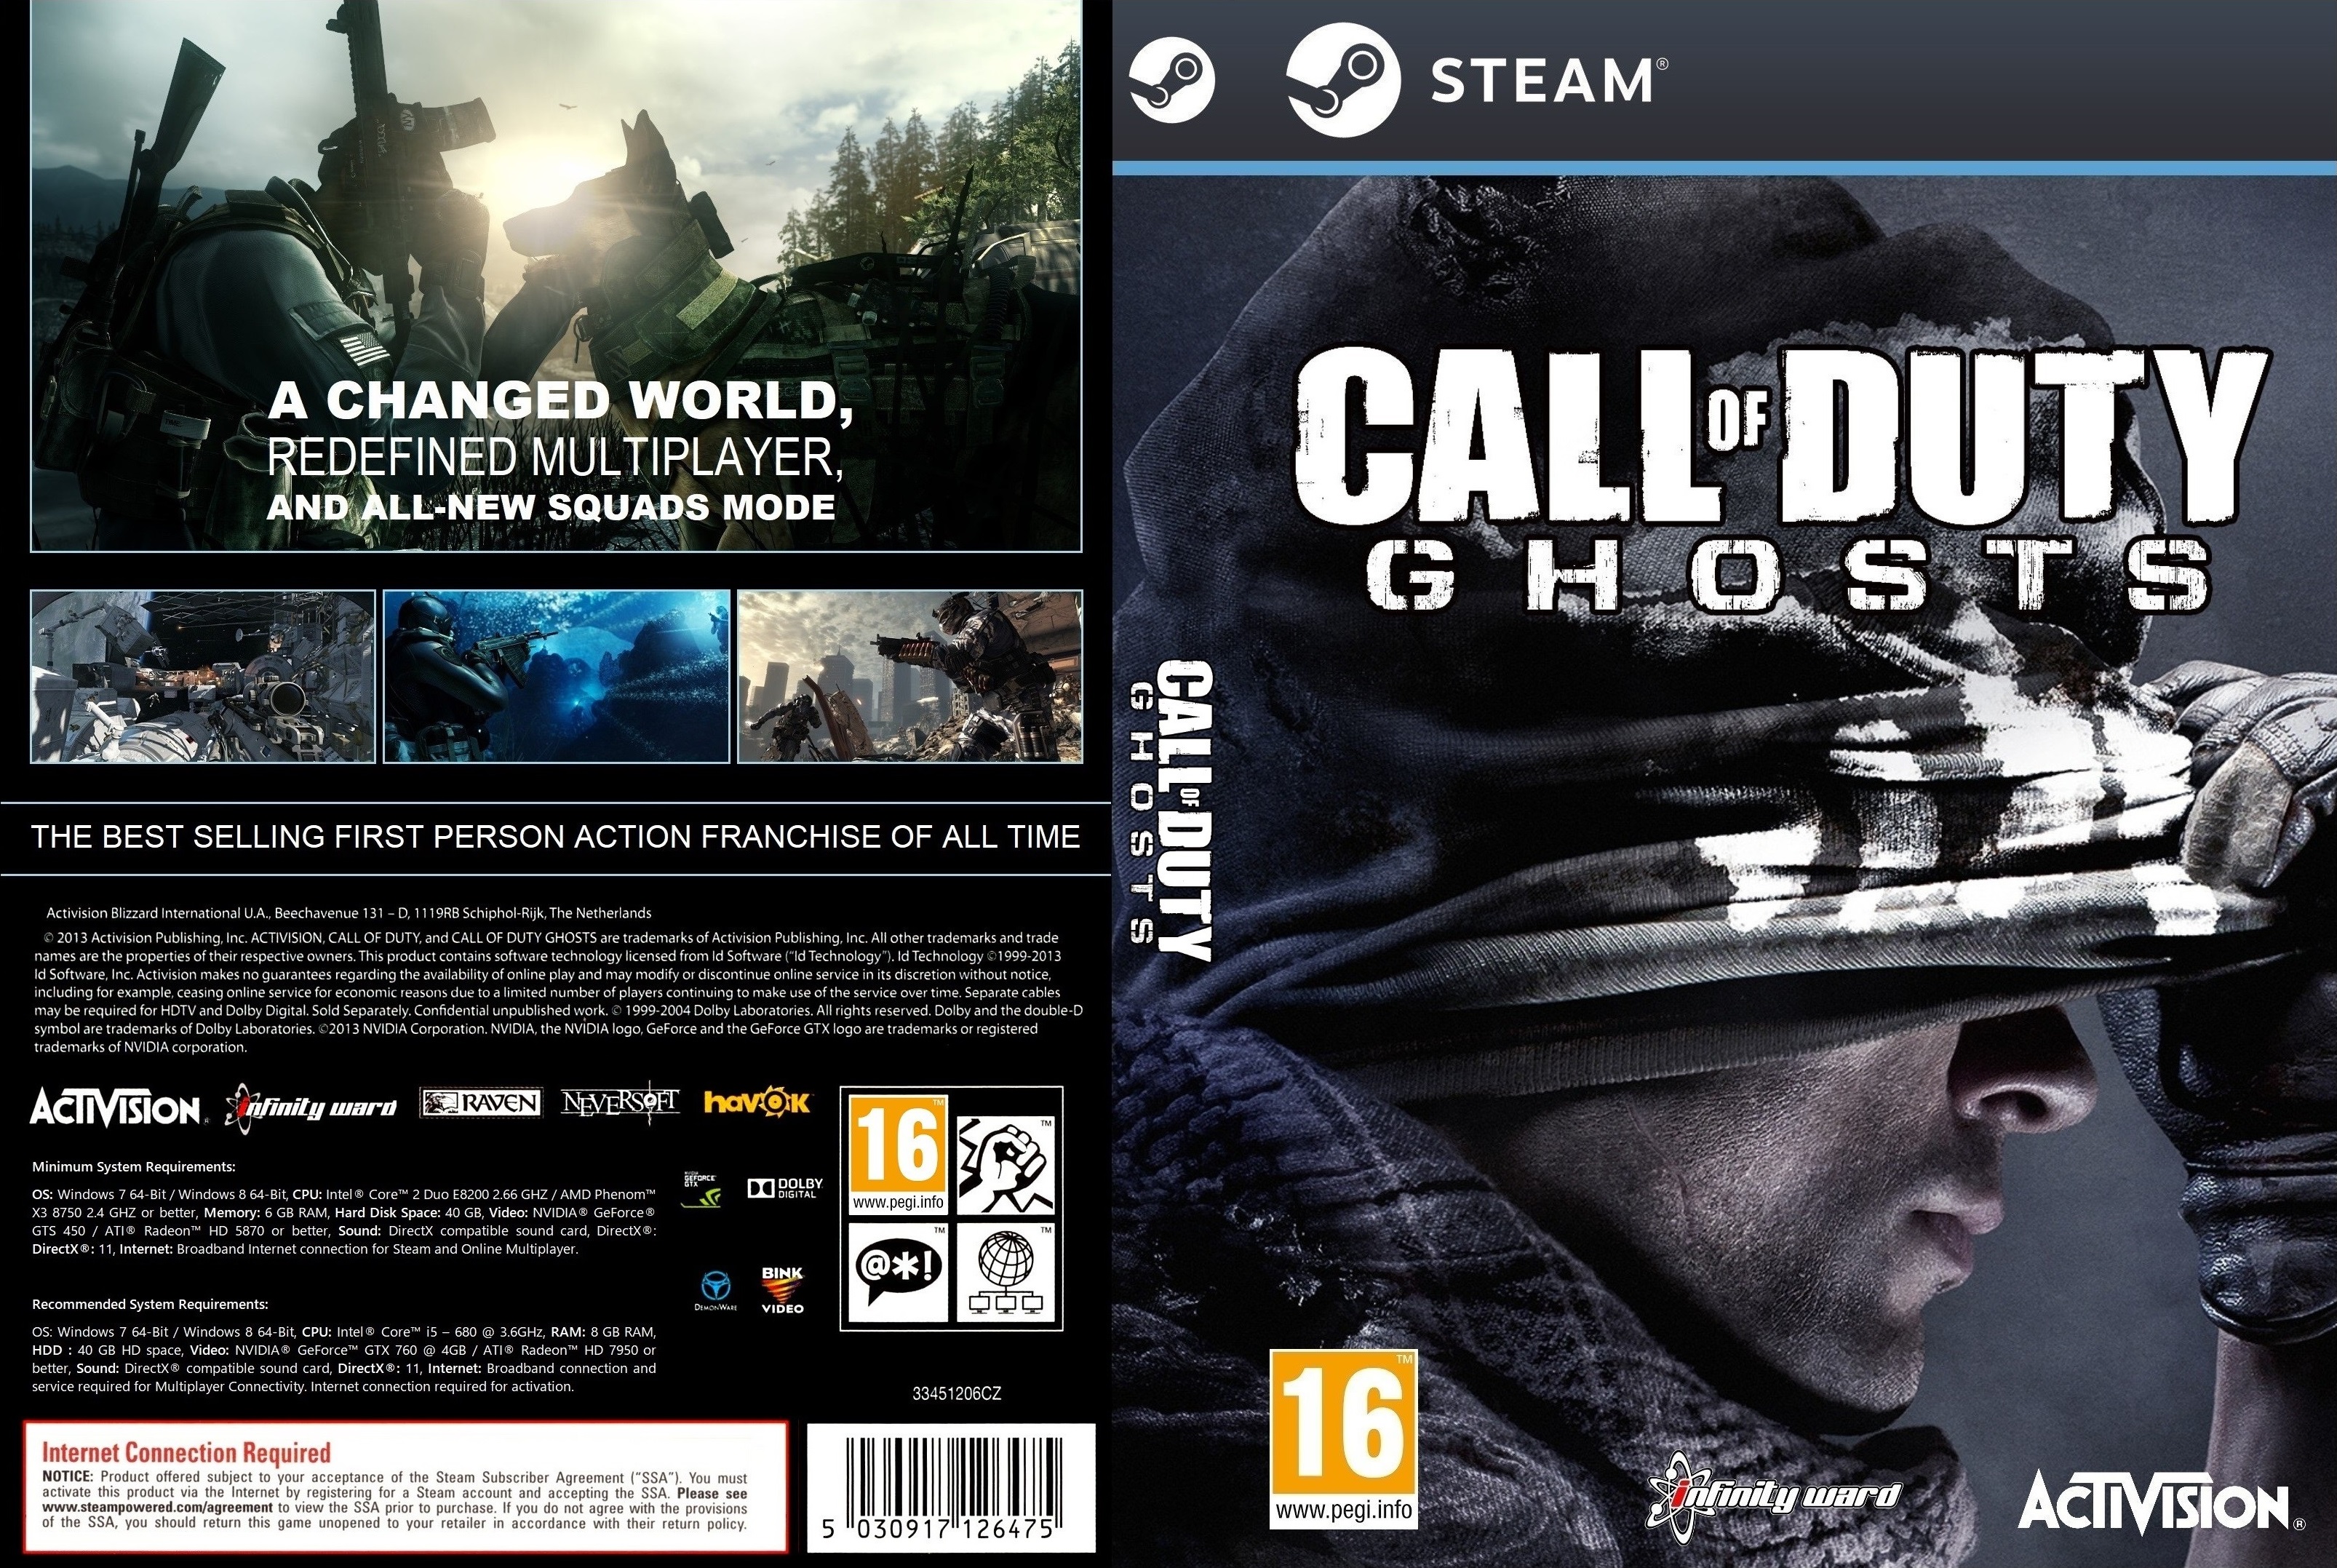 COD Ghosts PC Cover by psycosid09 on DeviantArt